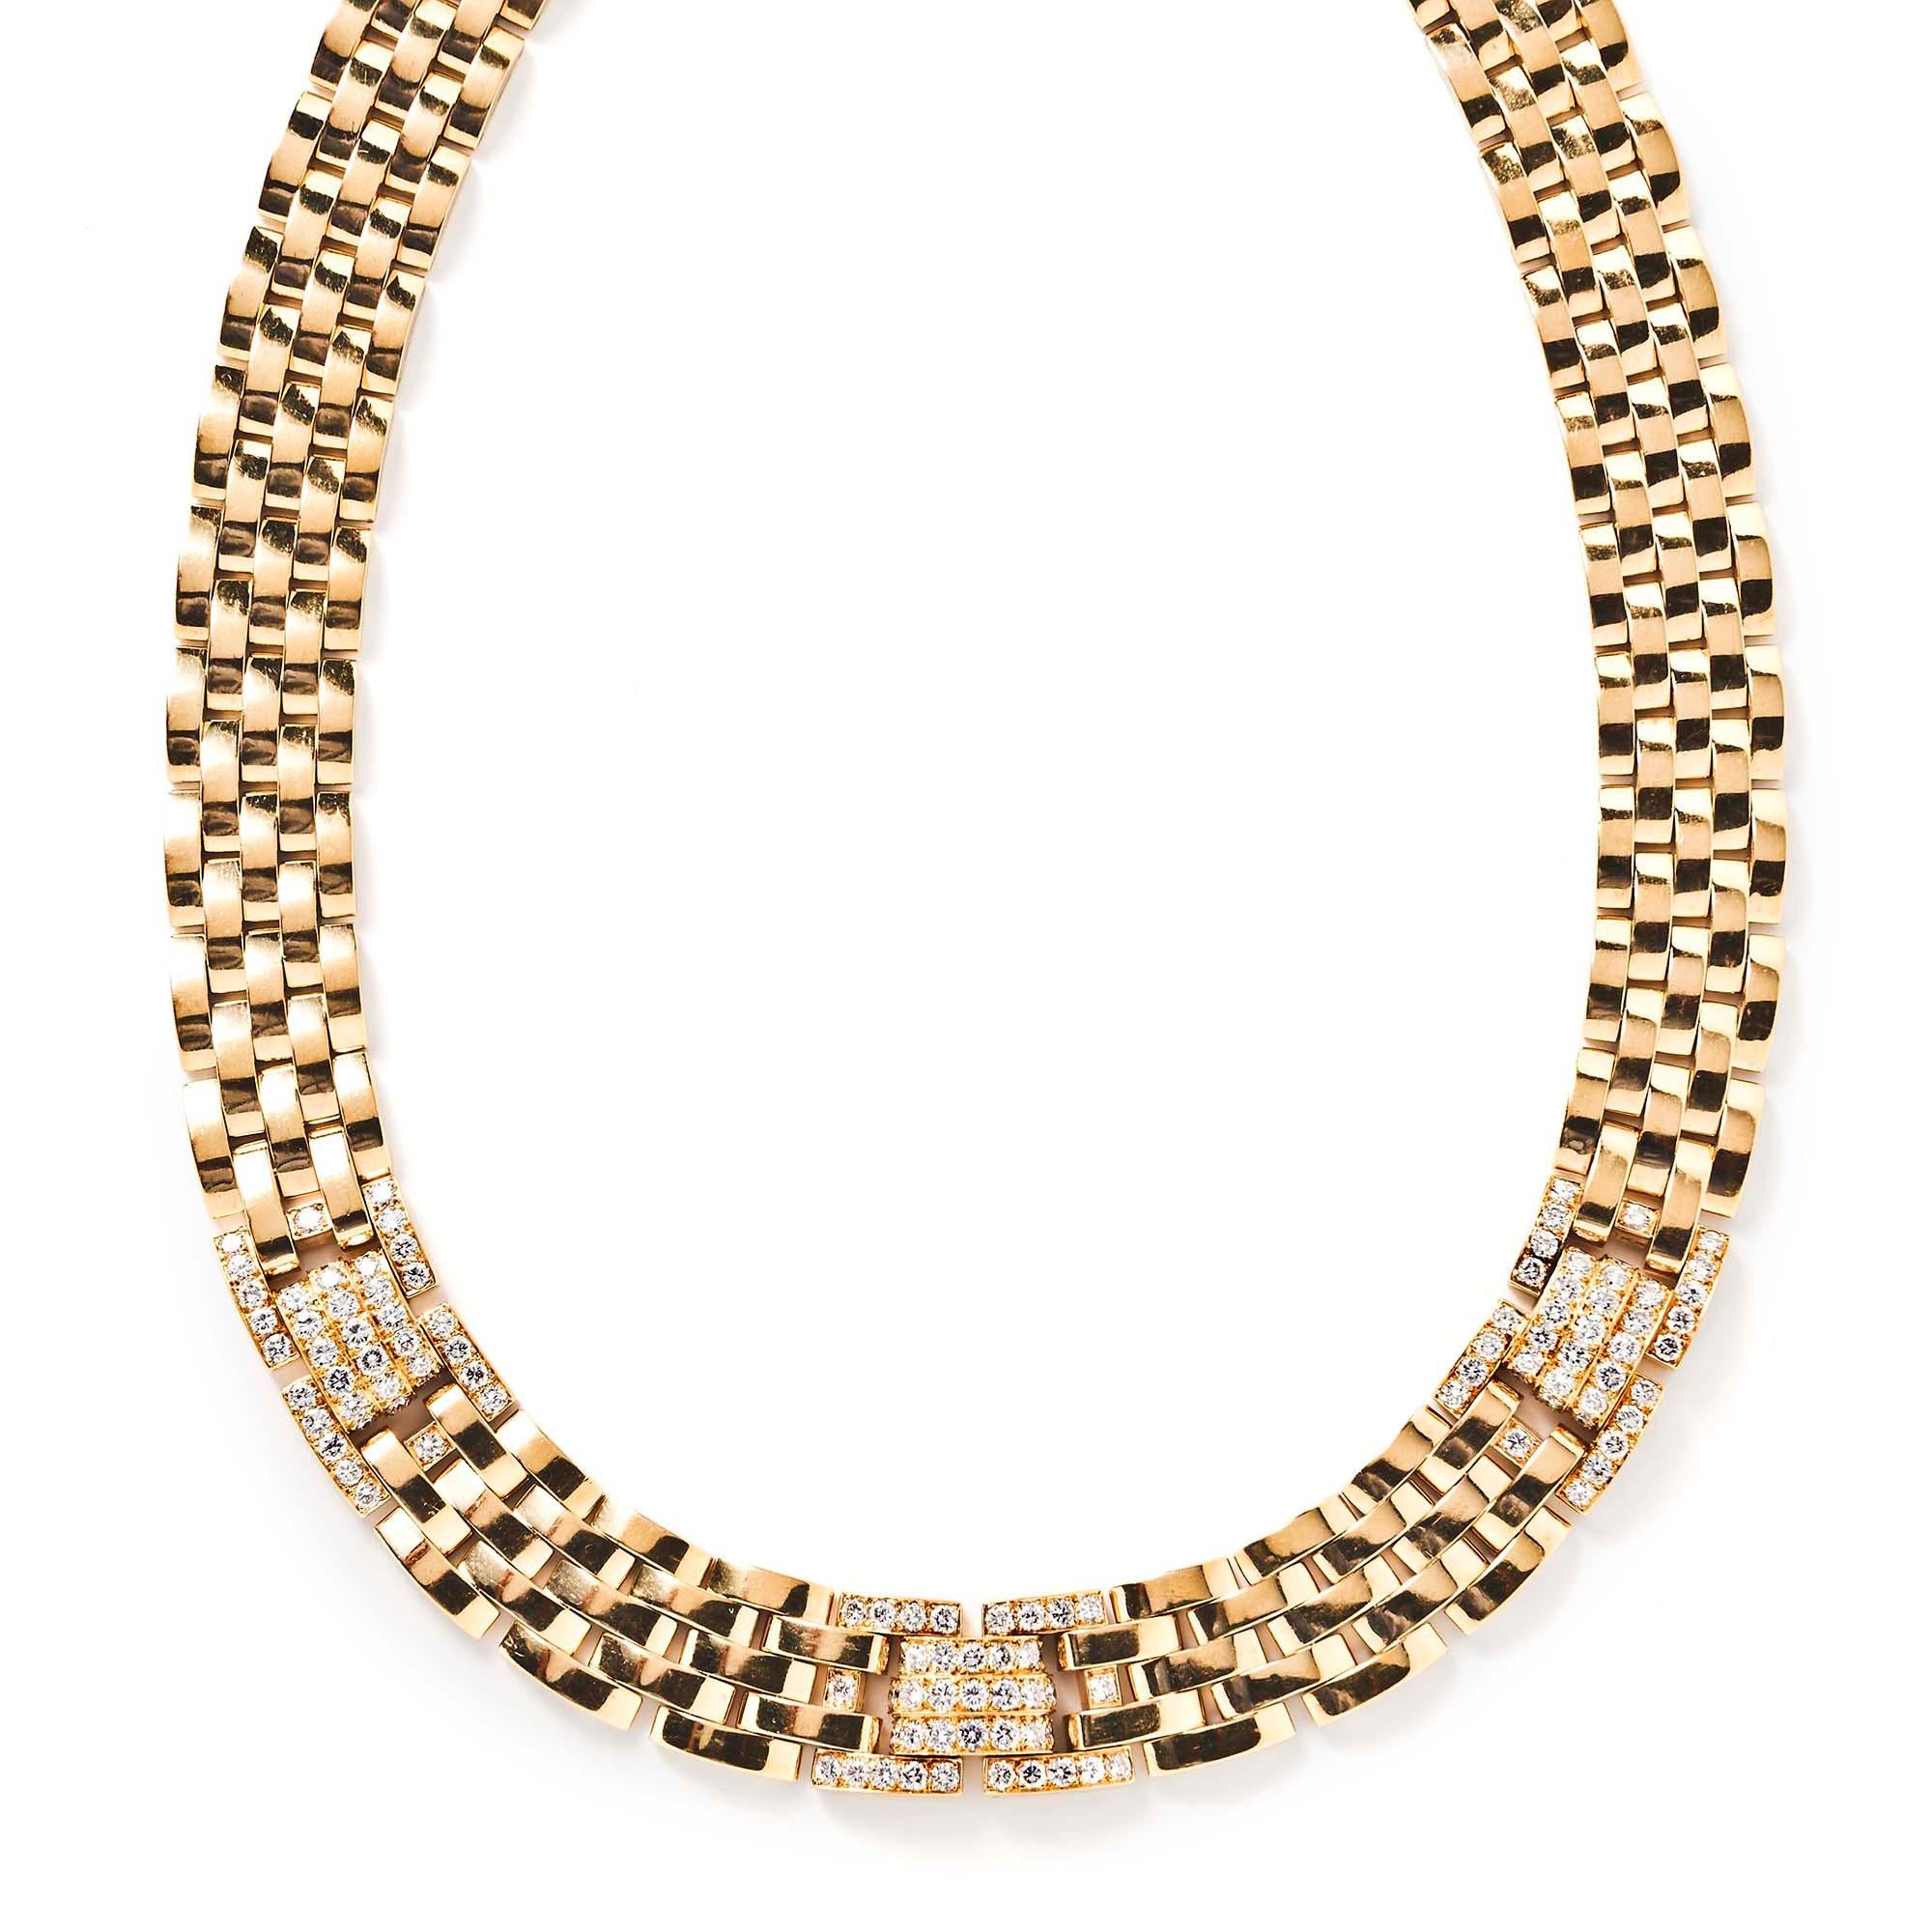 Named after Cartier’s iconic panther and noted for its comfort and ease of drape, this Maillon Panthère necklace features five rows of 18k yellow gold interlocking brickwork links highlighted by three diamond segments. It sits high on the neck and